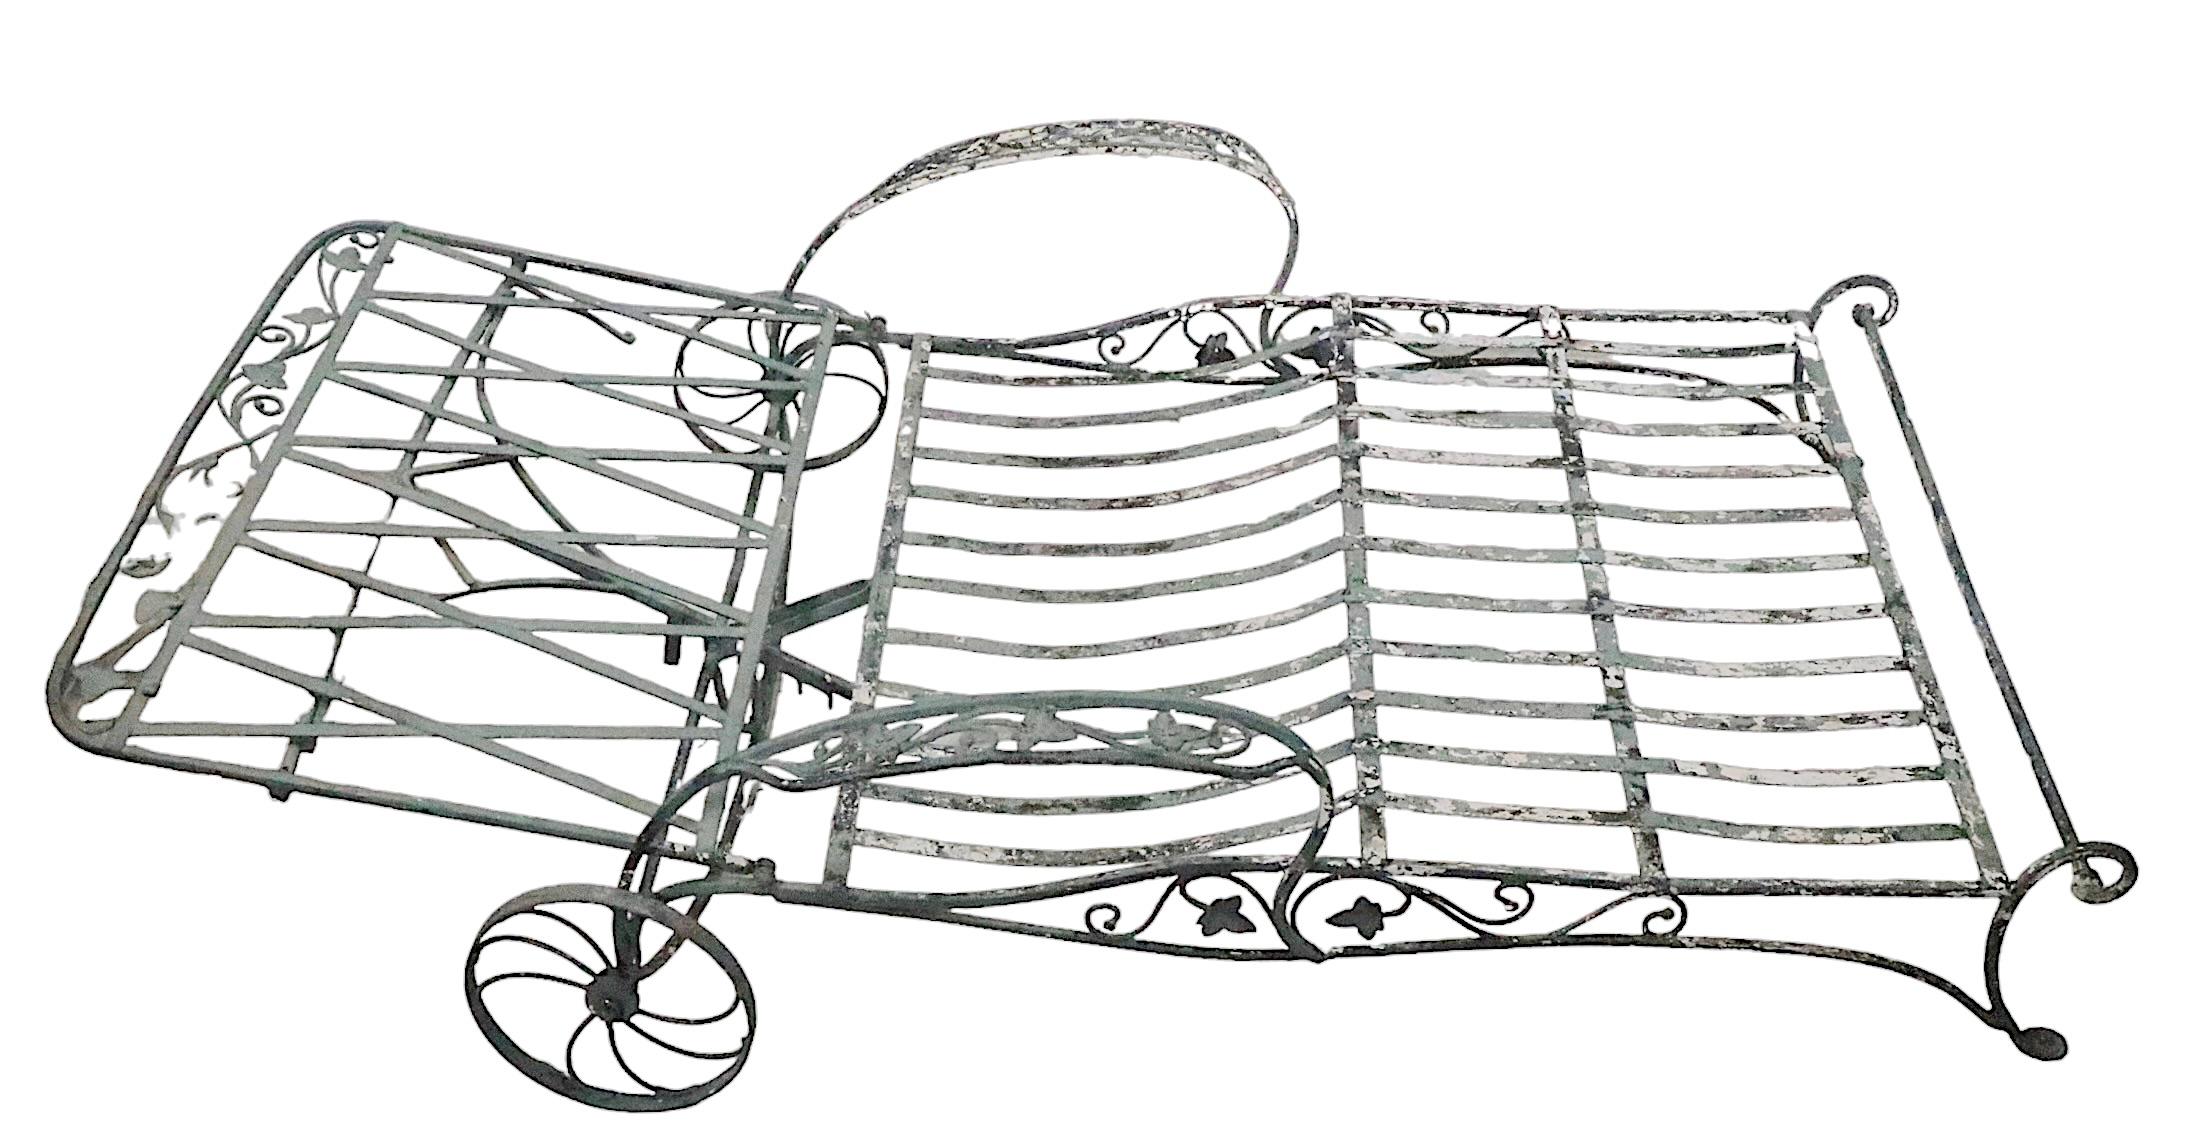  Wrought Iron Garden Patio  Double Wide Reclining Chaise Lounge by Salterini  11